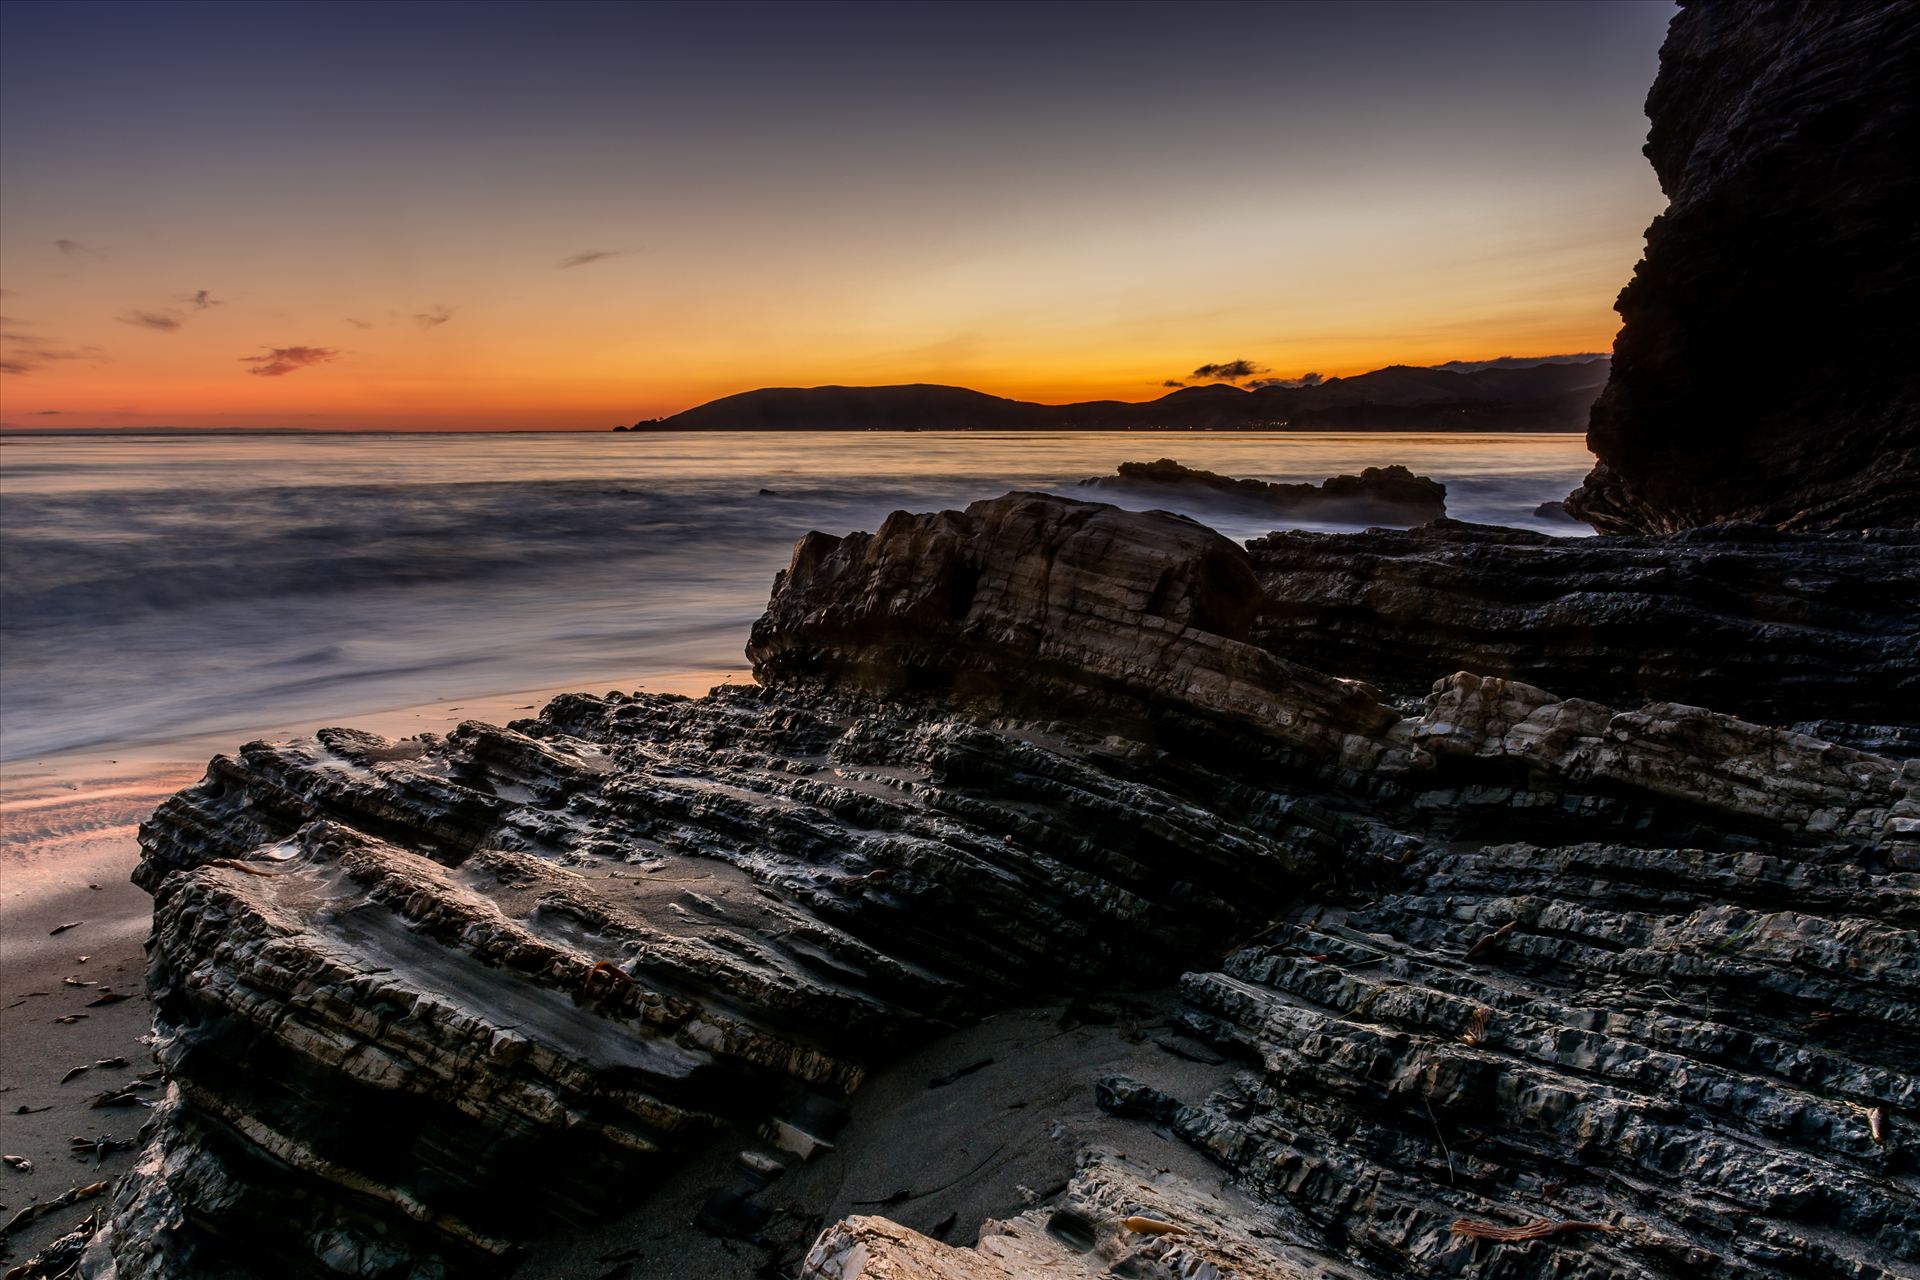 Avila in the Distance.jpg Spyglass cliffs at sunset with Avila Beach in the distance by Sarah Williams